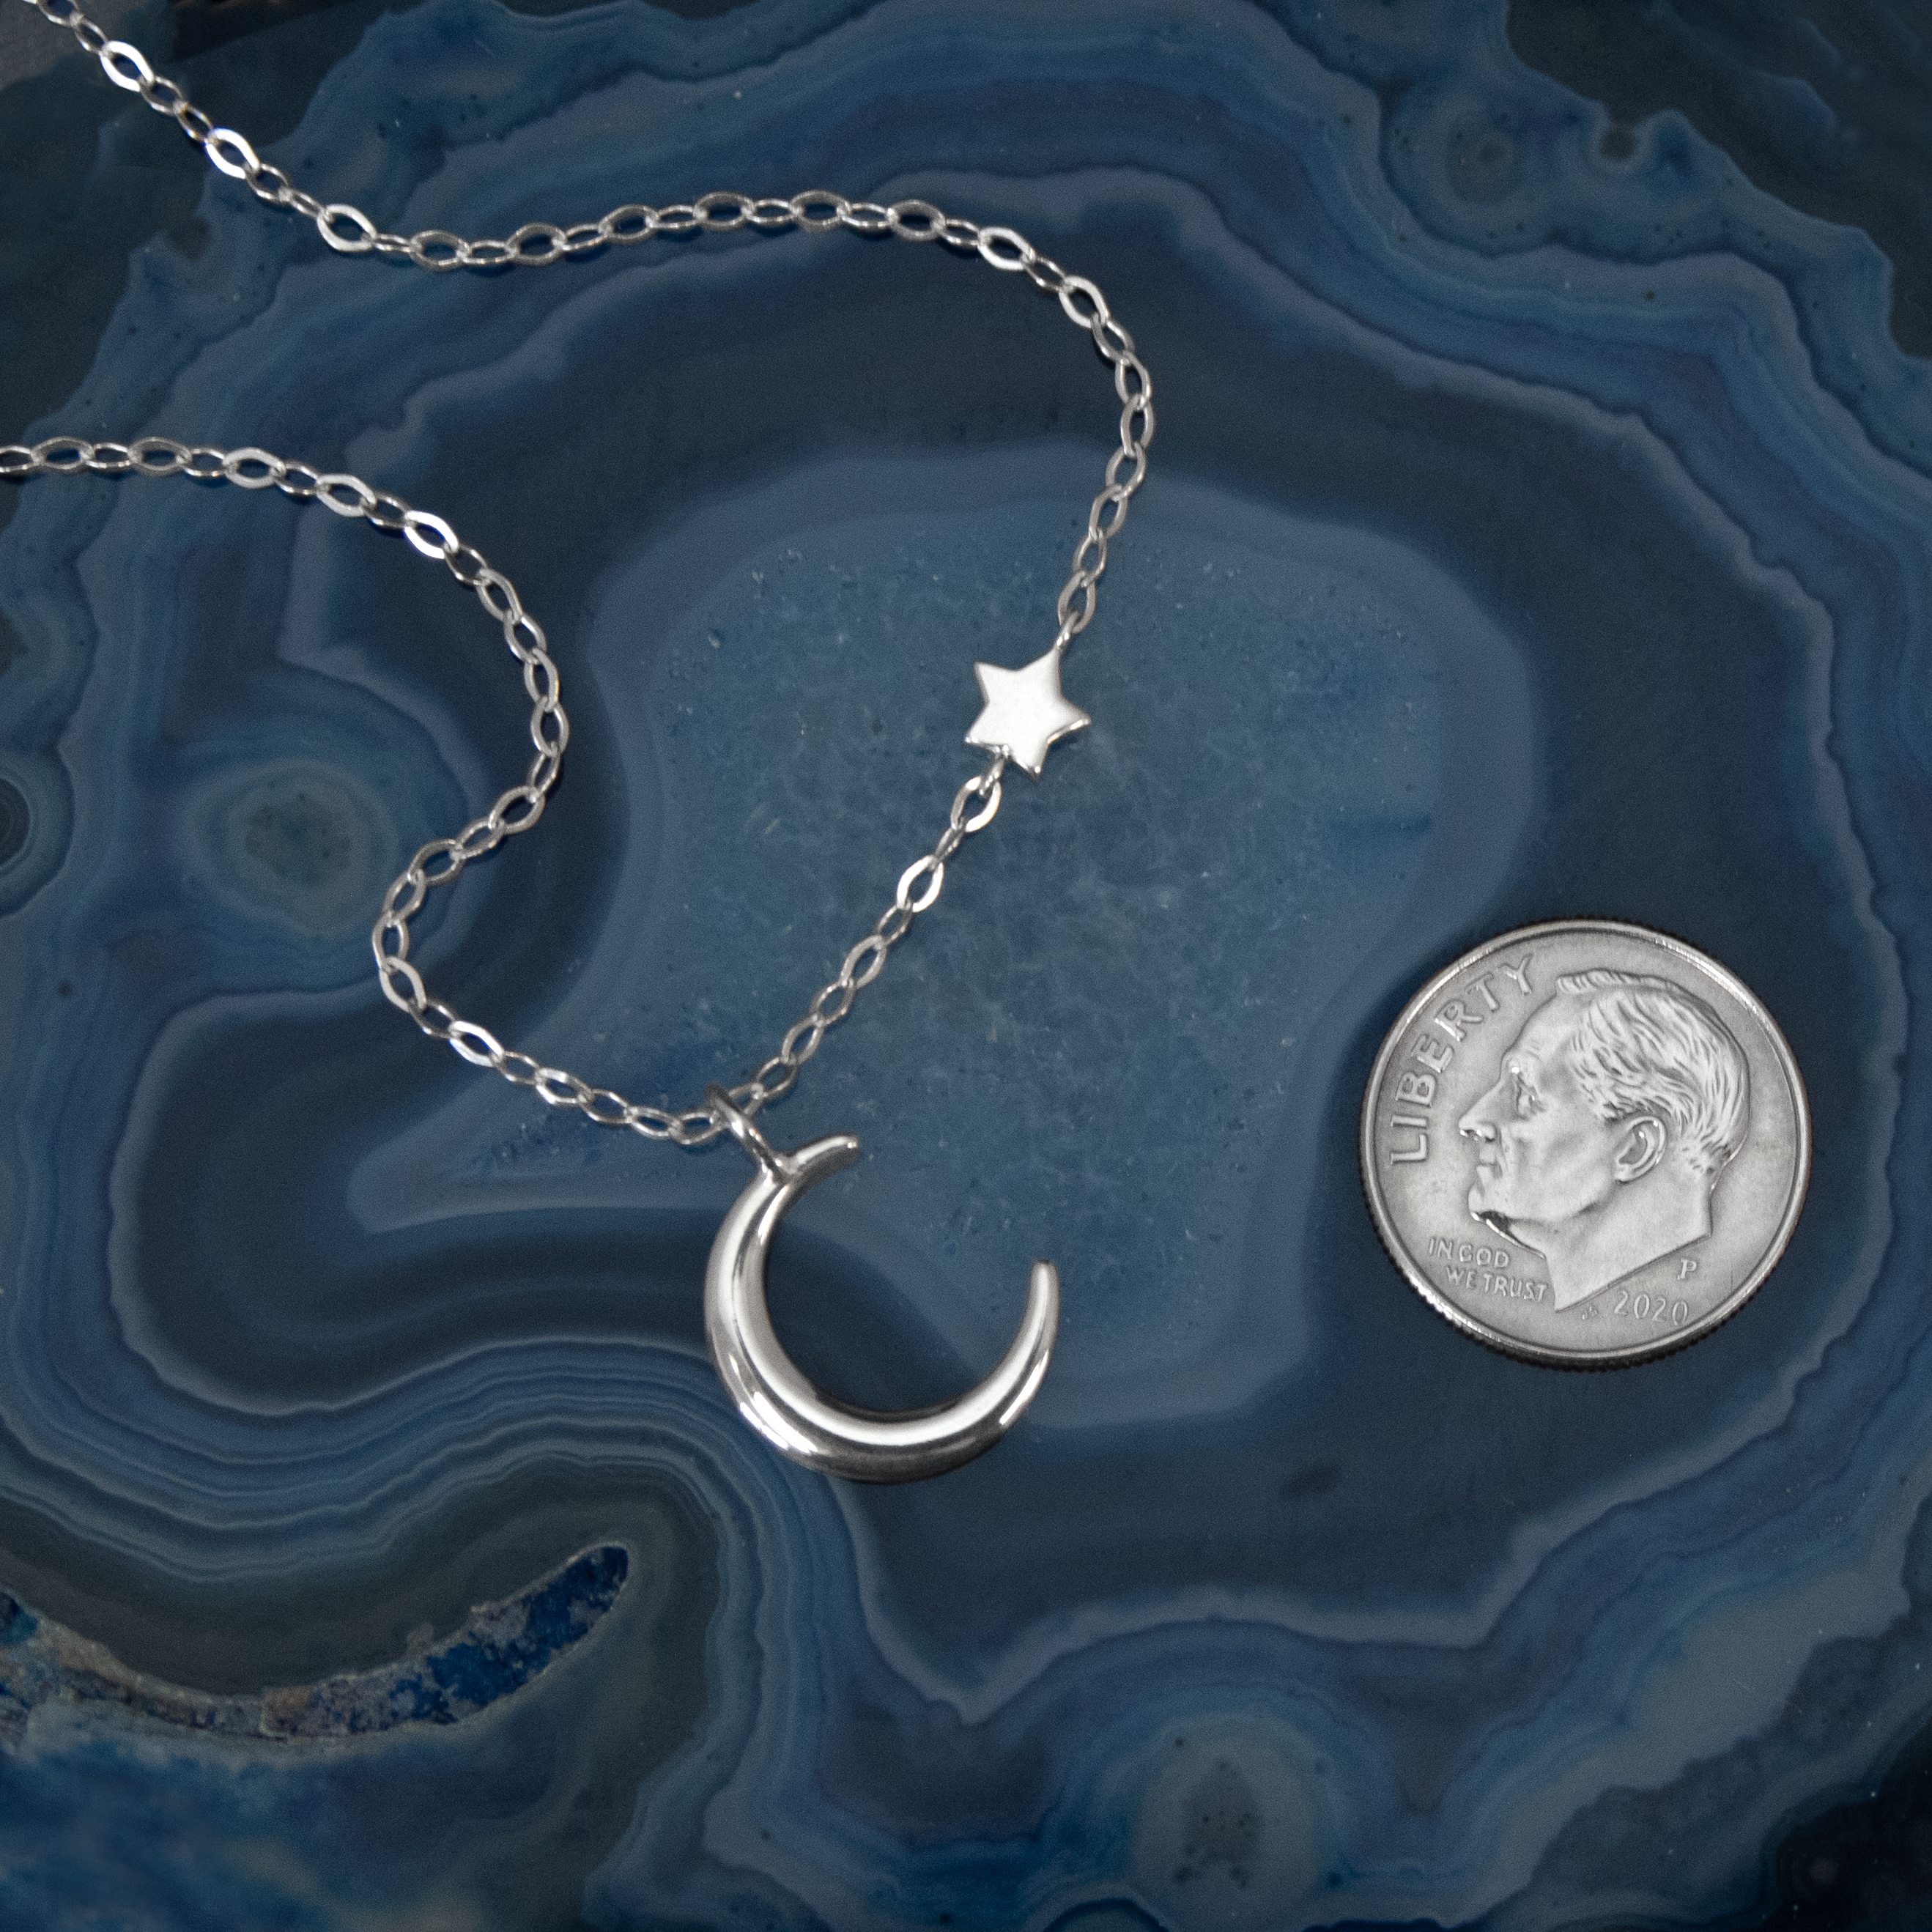 Amazon.com: Glow in the Dark Rose Gold Stainless Steel Custom Birth Moon  Necklace with Personalized Birthday Moon Phase from the Day You were Born,  18mm : Handmade Products